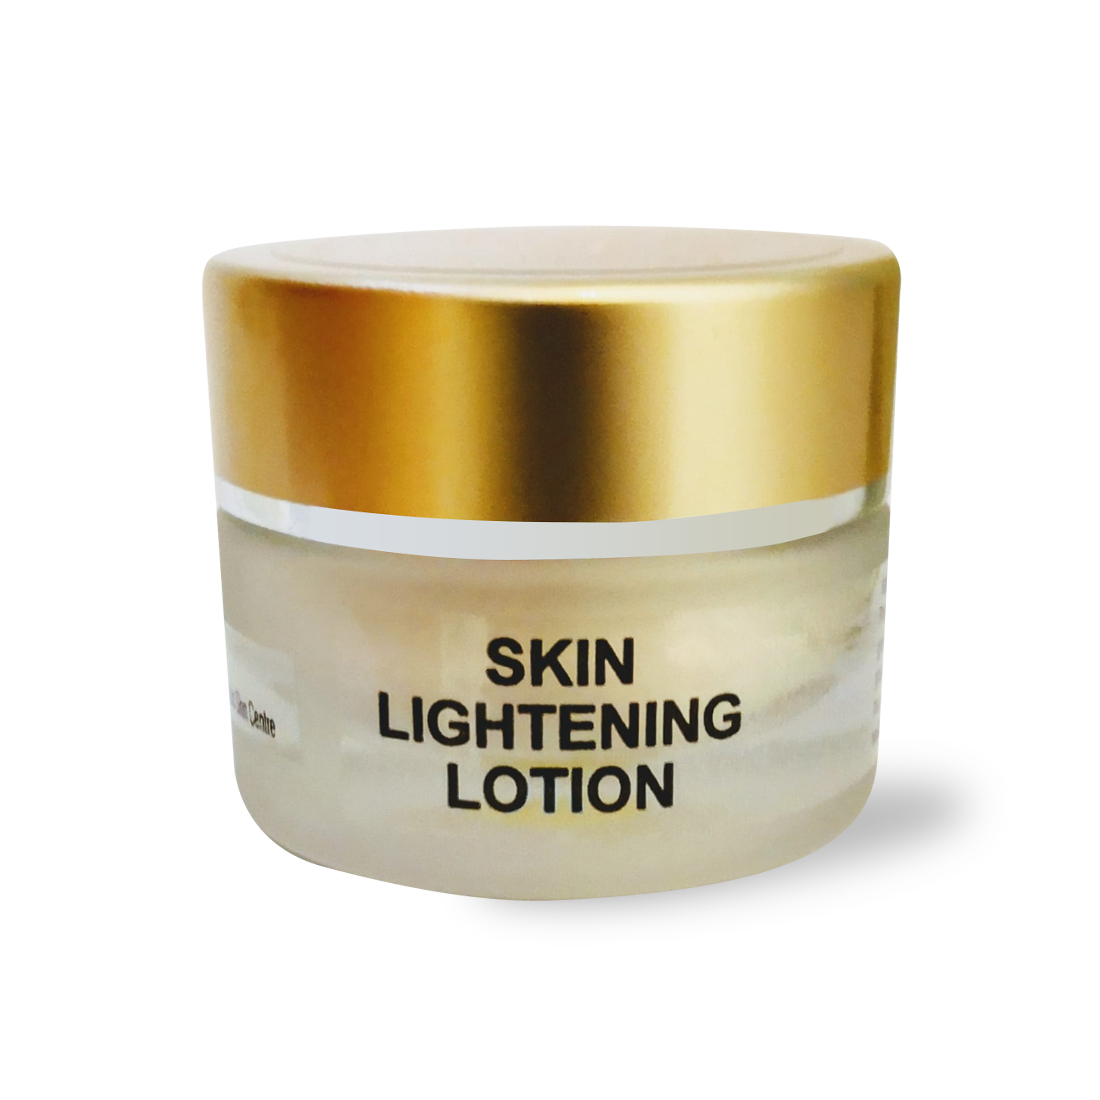 Skin Lightening Lotion - Dermacare Therapeutic Skincare